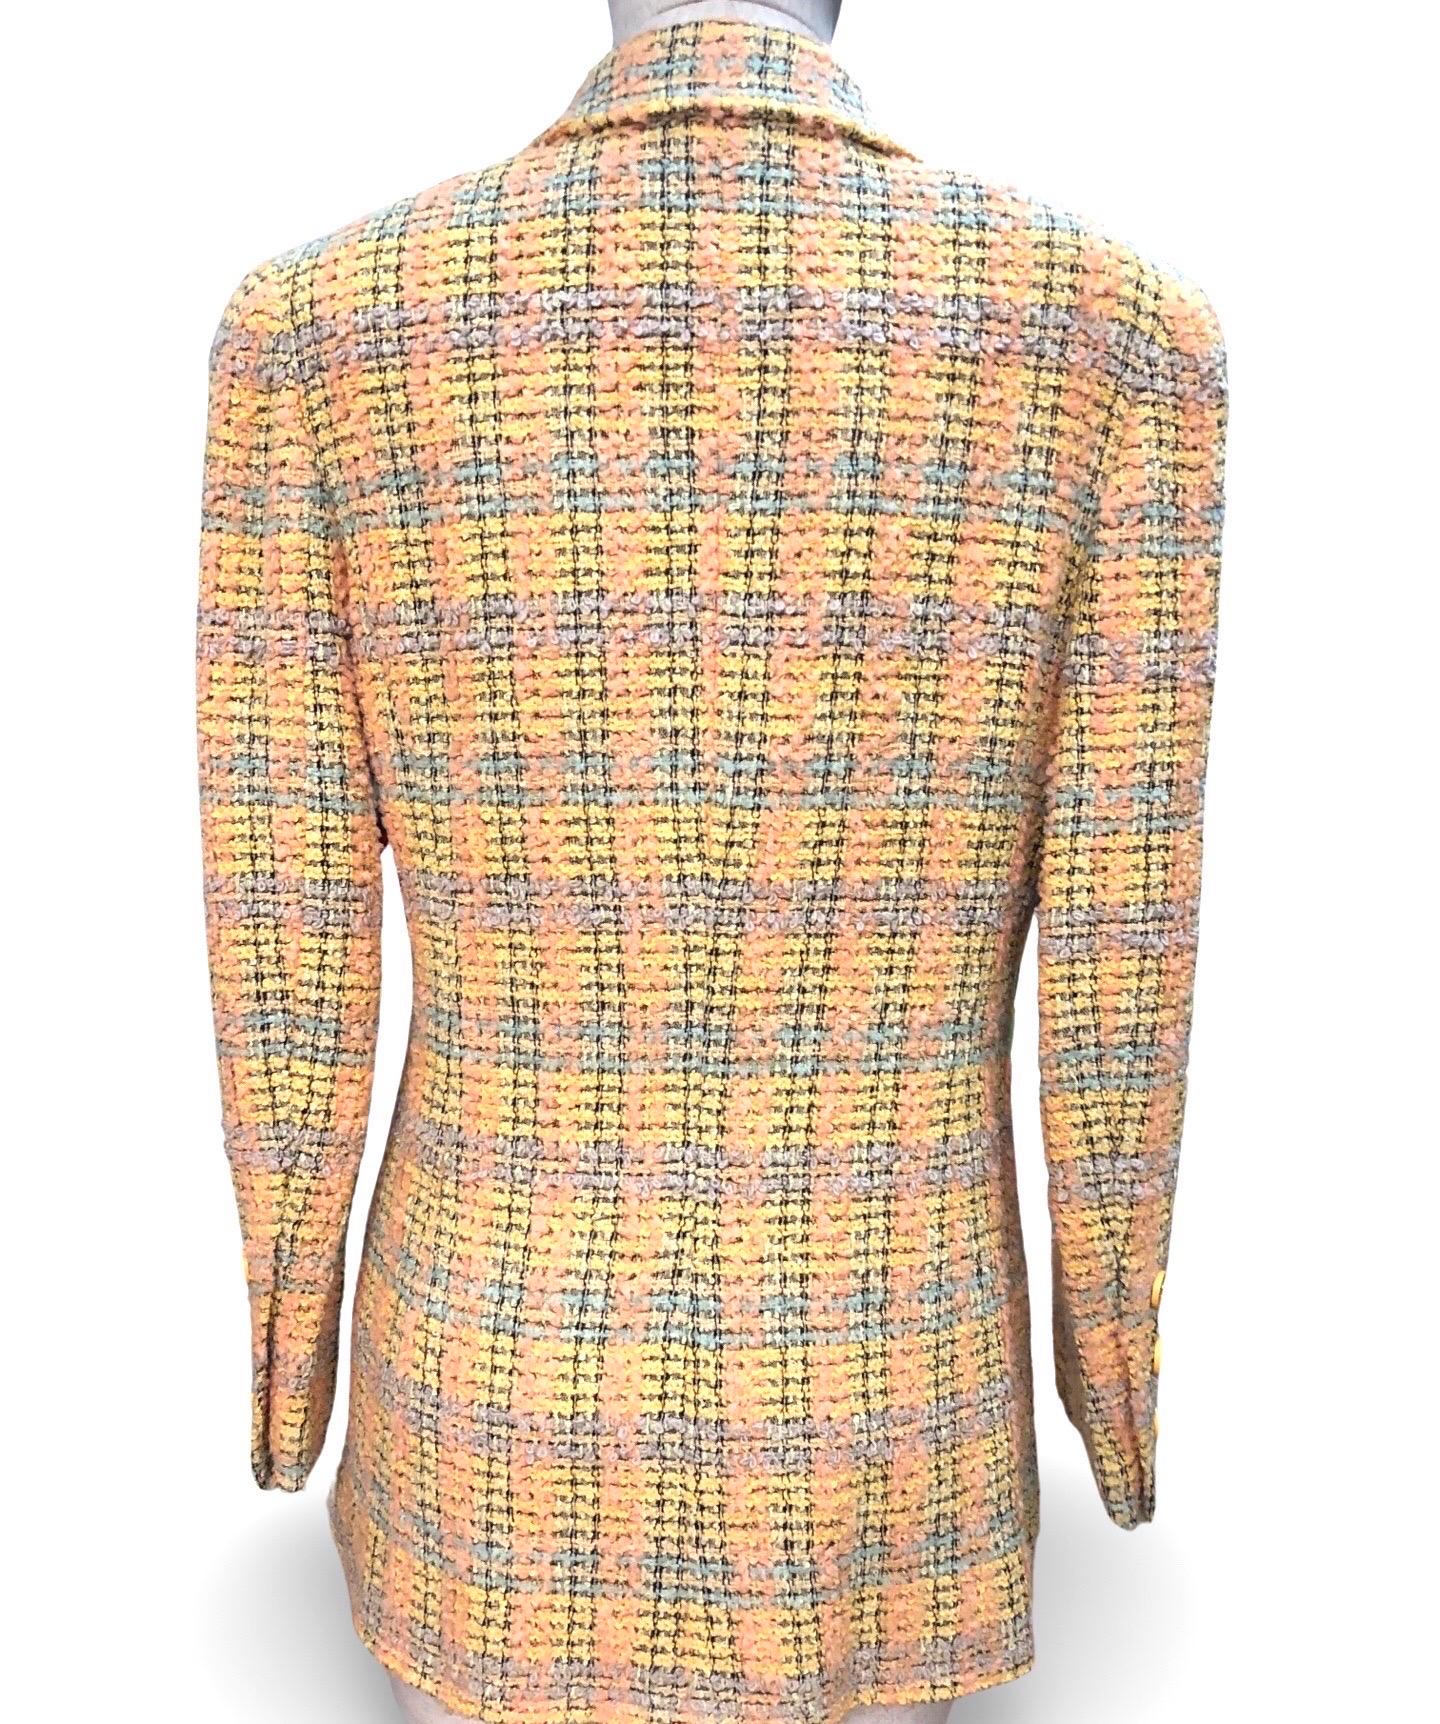 - Chanel multi-coloured yellow/orange tweed jacket from year 1994 A/W collection. 

- Featuring a yellow gold toned CC button single breasted closure.

- Front chest open pocket and two front open pockets.

- Size 40. (it fits like 38.) 

- 72%